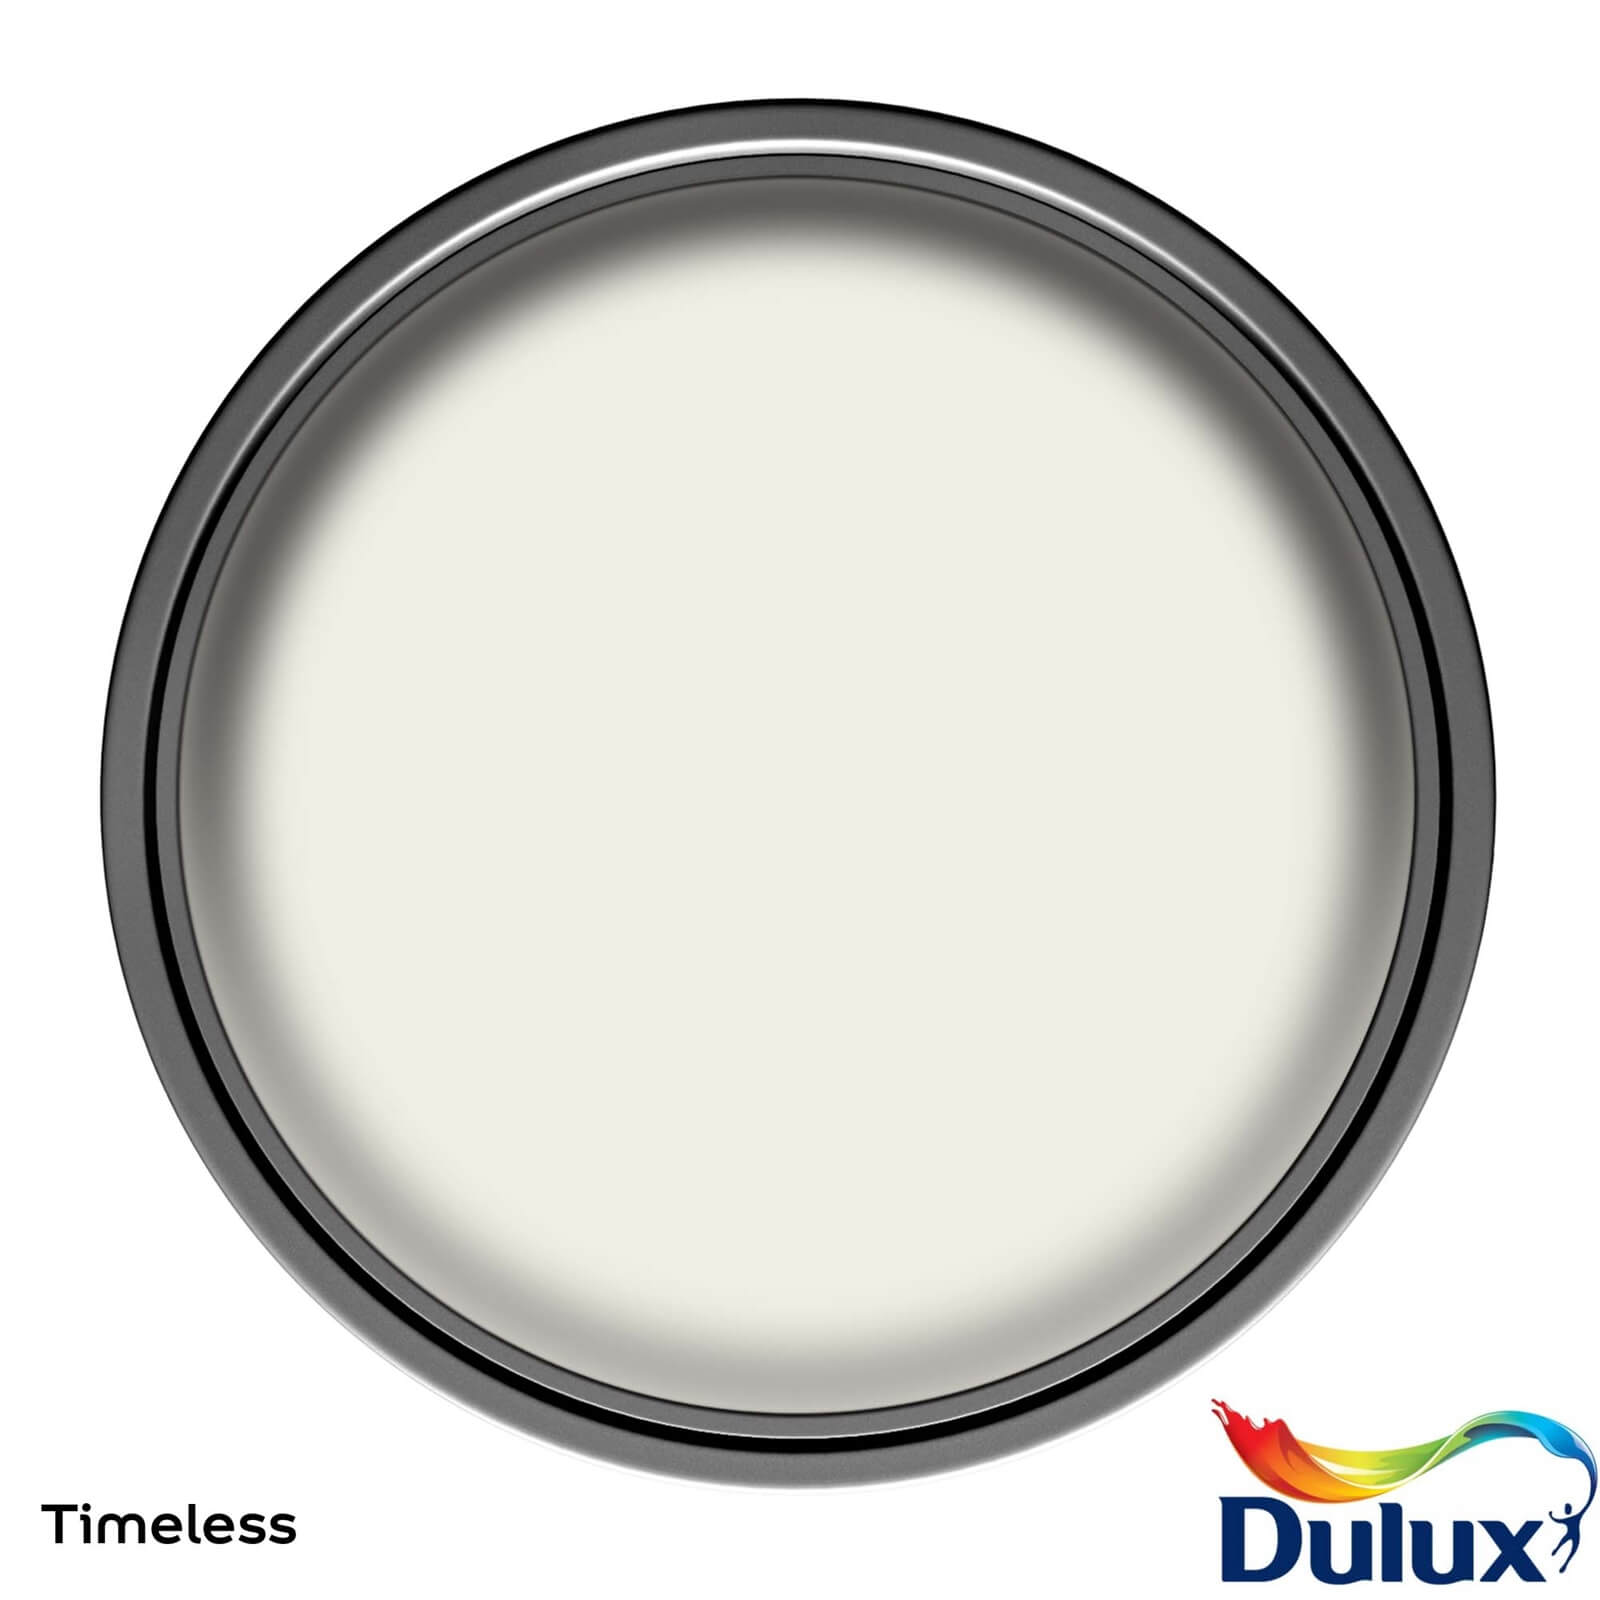 Dulux Quick Dry Satinwood Timeless - 750ml